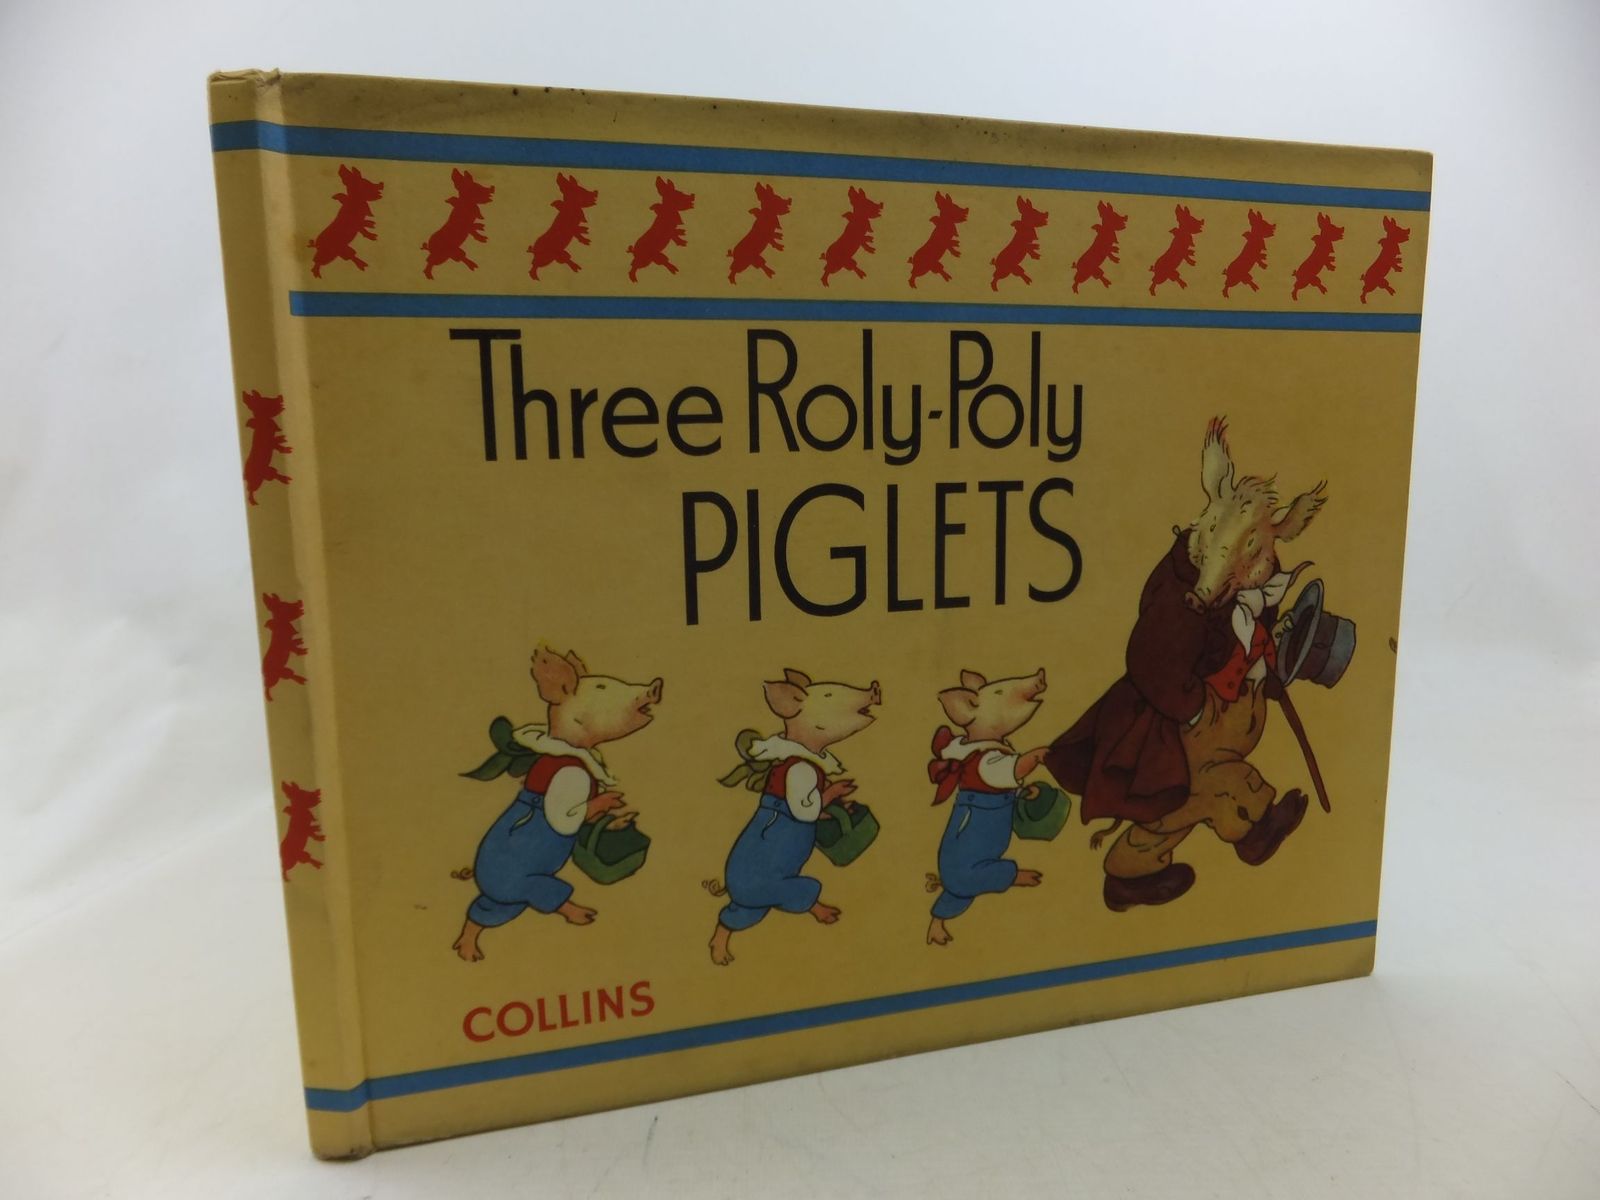 Photo of THREE ROLY-POLY PIGLETS written by Allen, Philip Schuyler illustrated by Moe, Louis published by Collins (STOCK CODE: 2113315)  for sale by Stella & Rose's Books